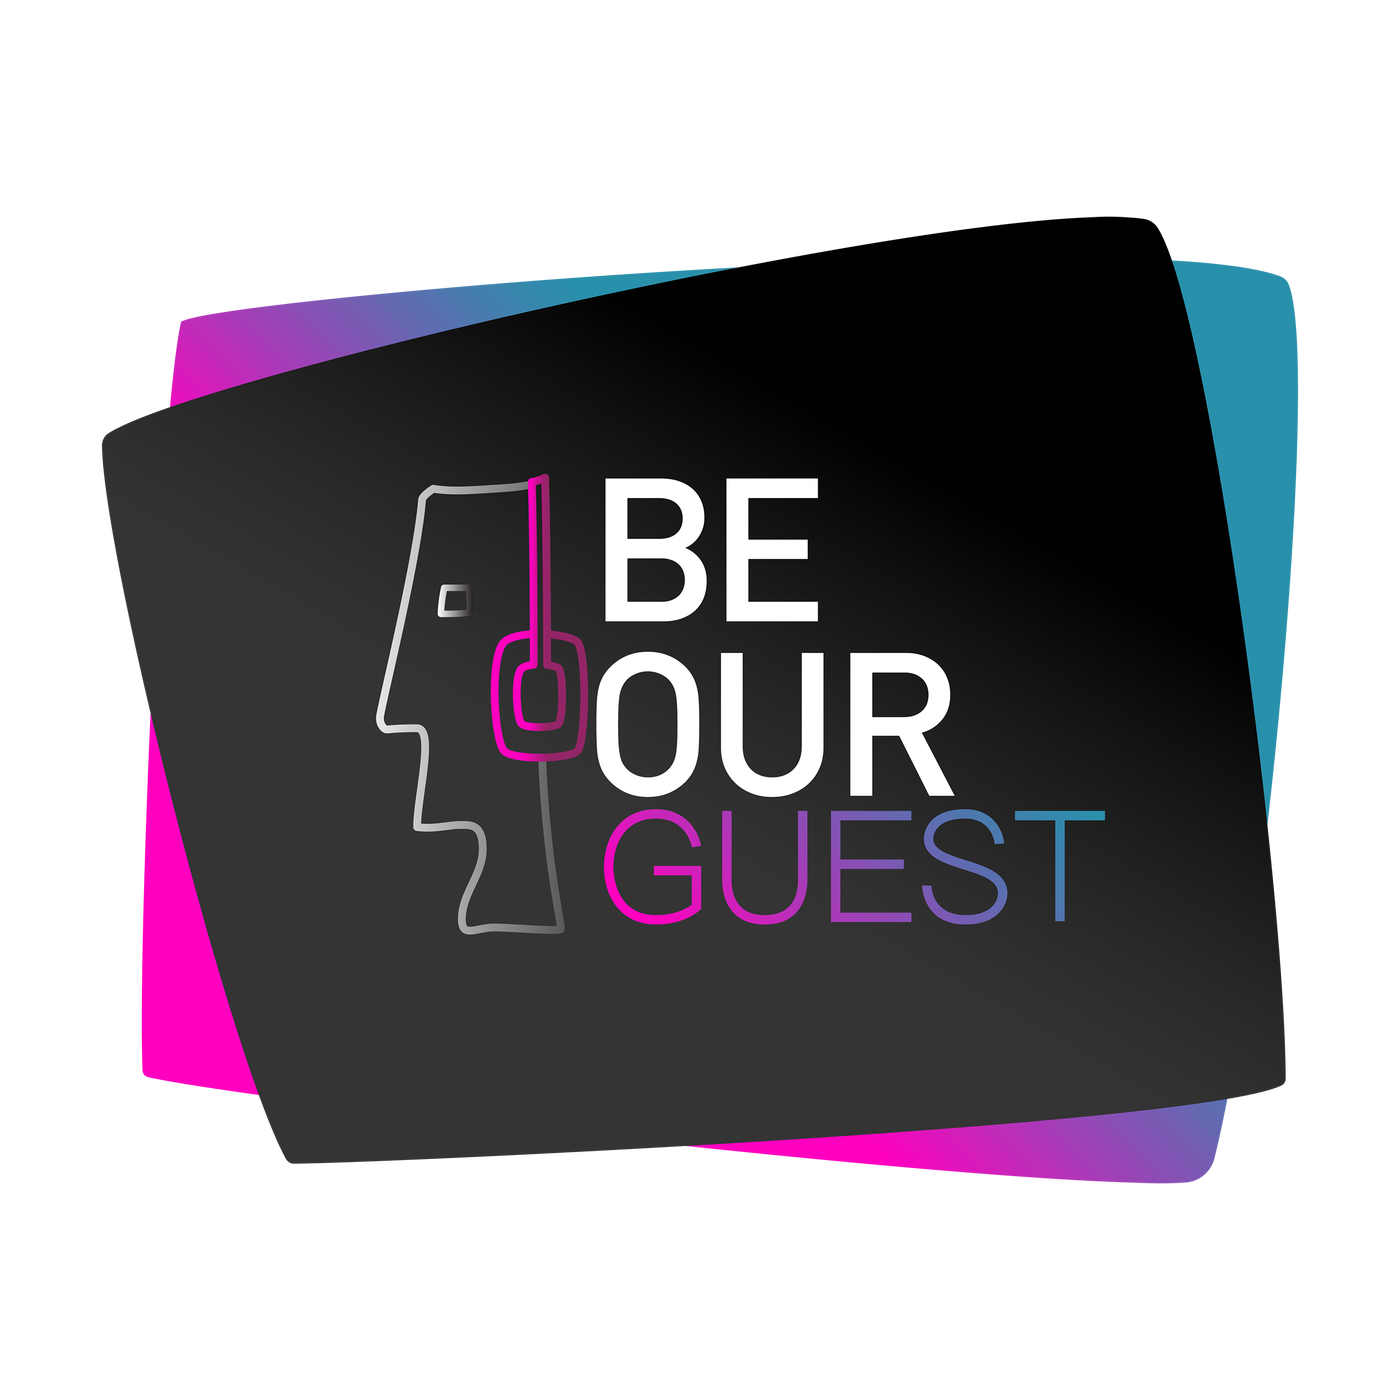 Trailer: Be our Guest